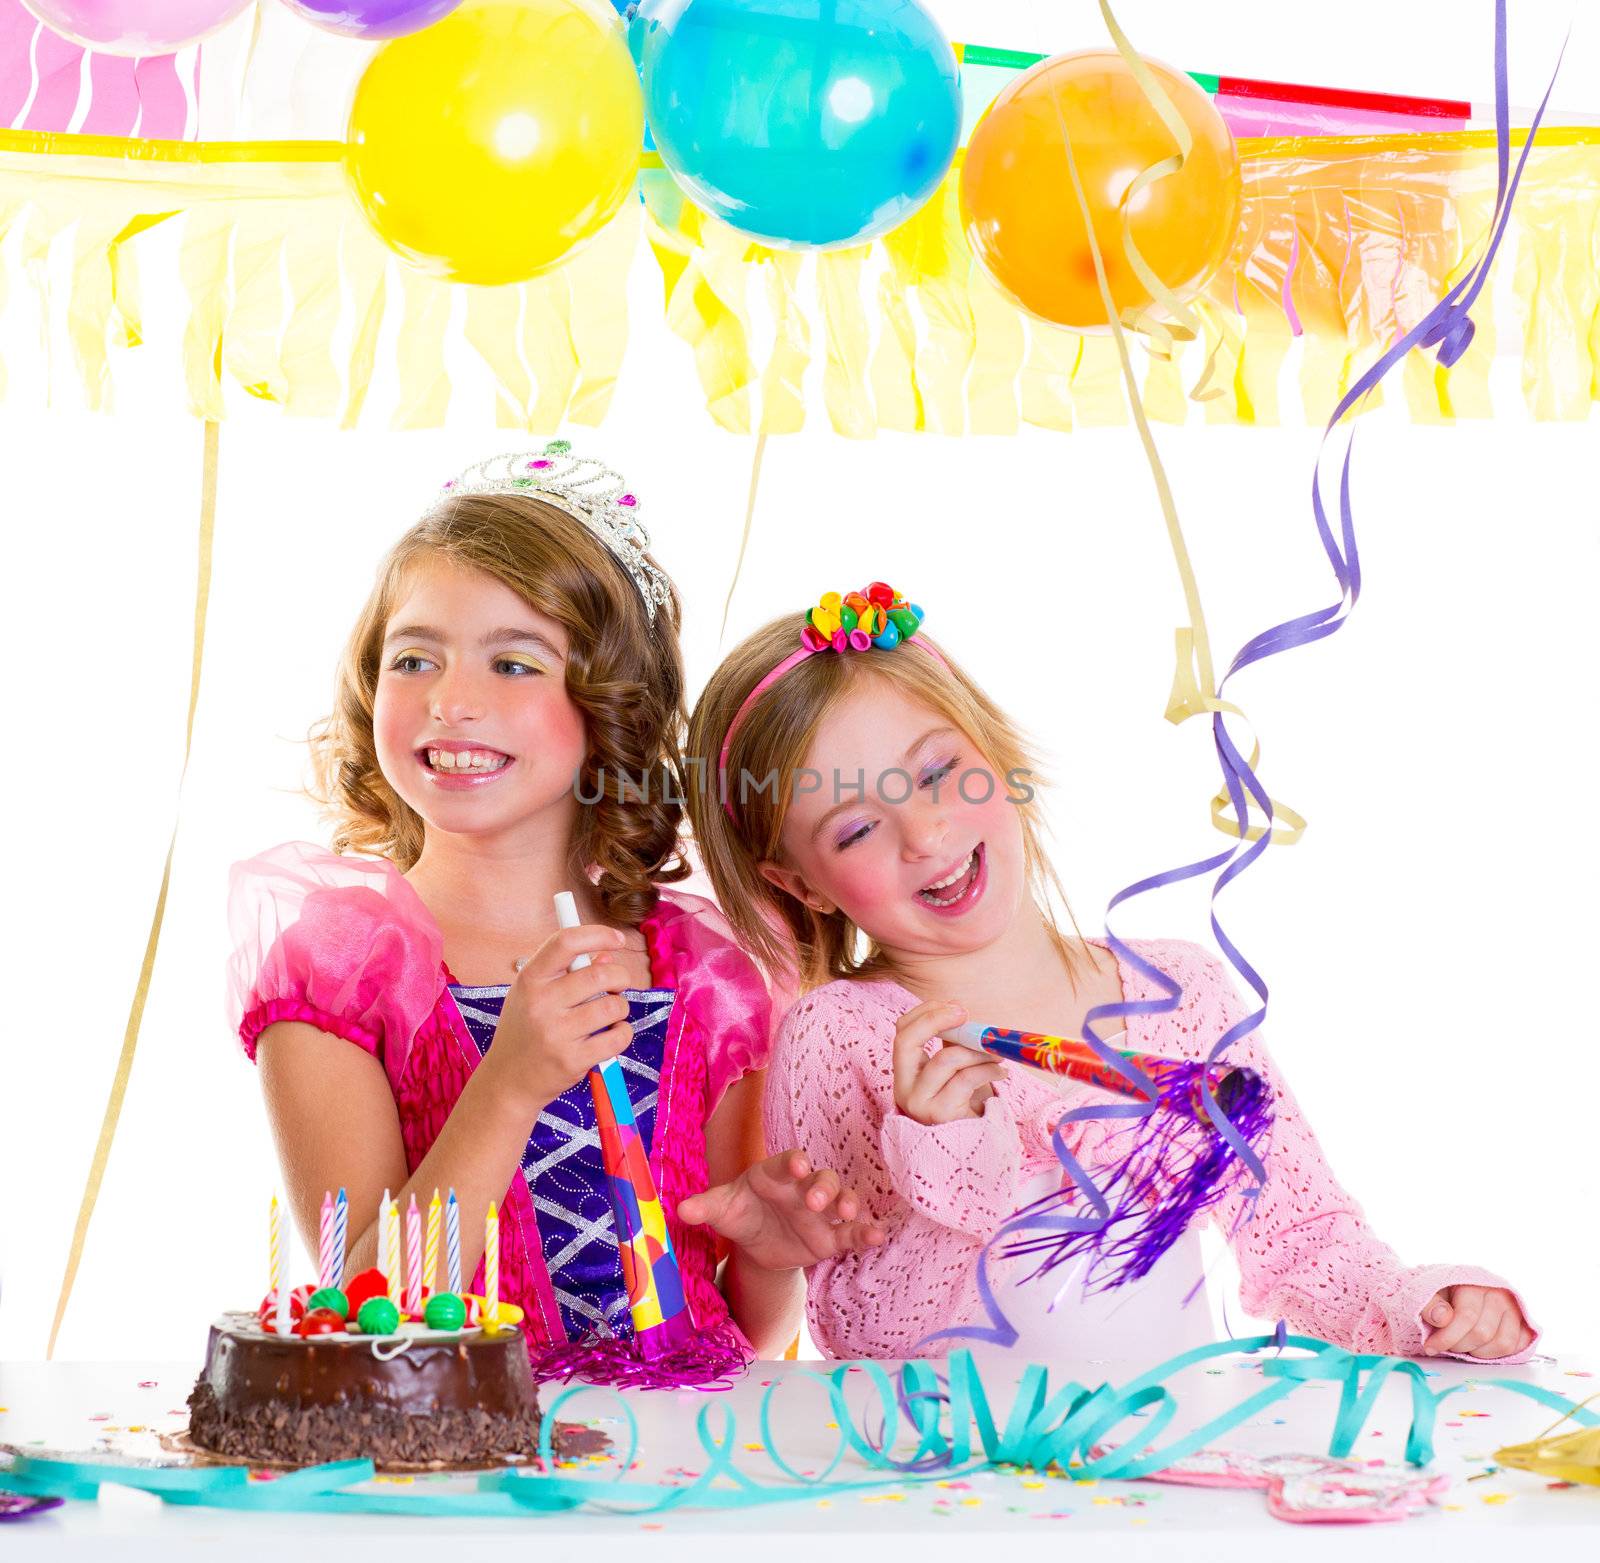 children kid in birthday party dancing happy laughing with balloons serpentine and garlands